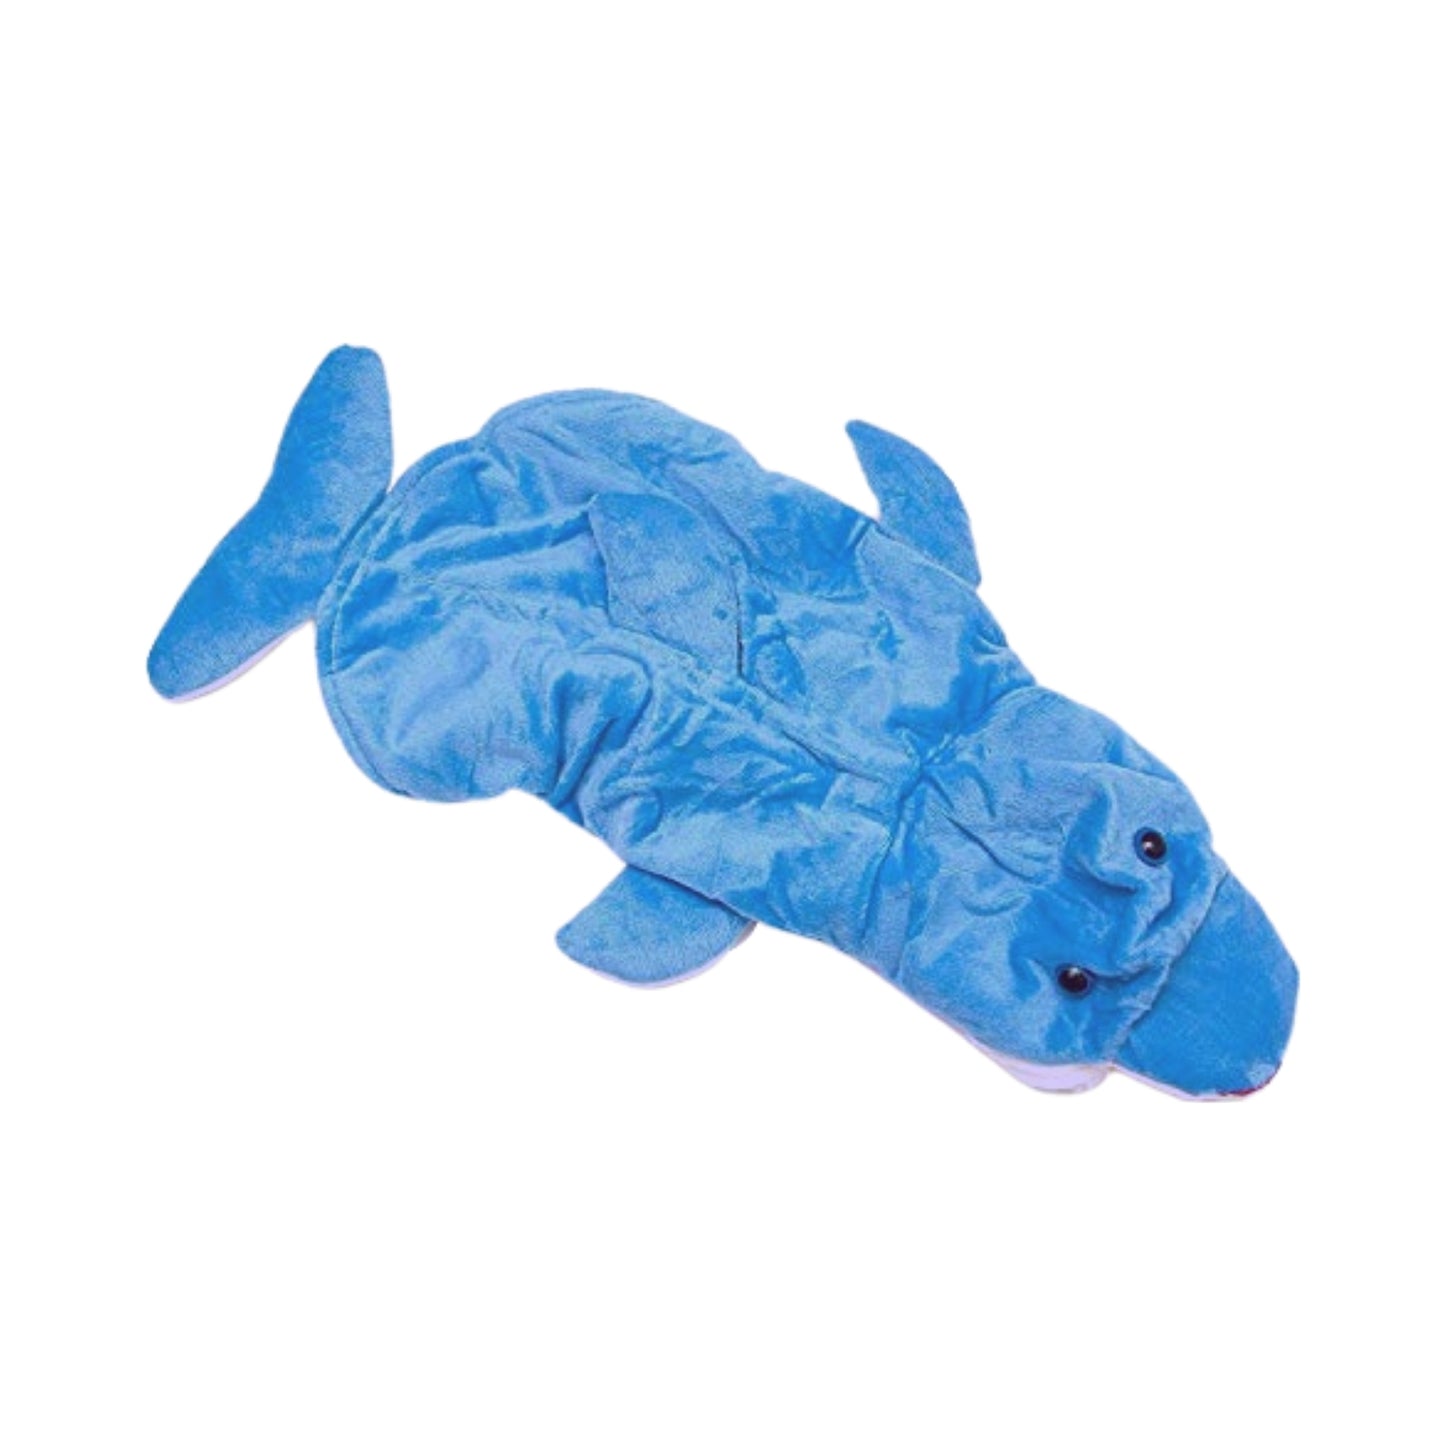 Midlee Blue Dolphin Small Dog Costume …